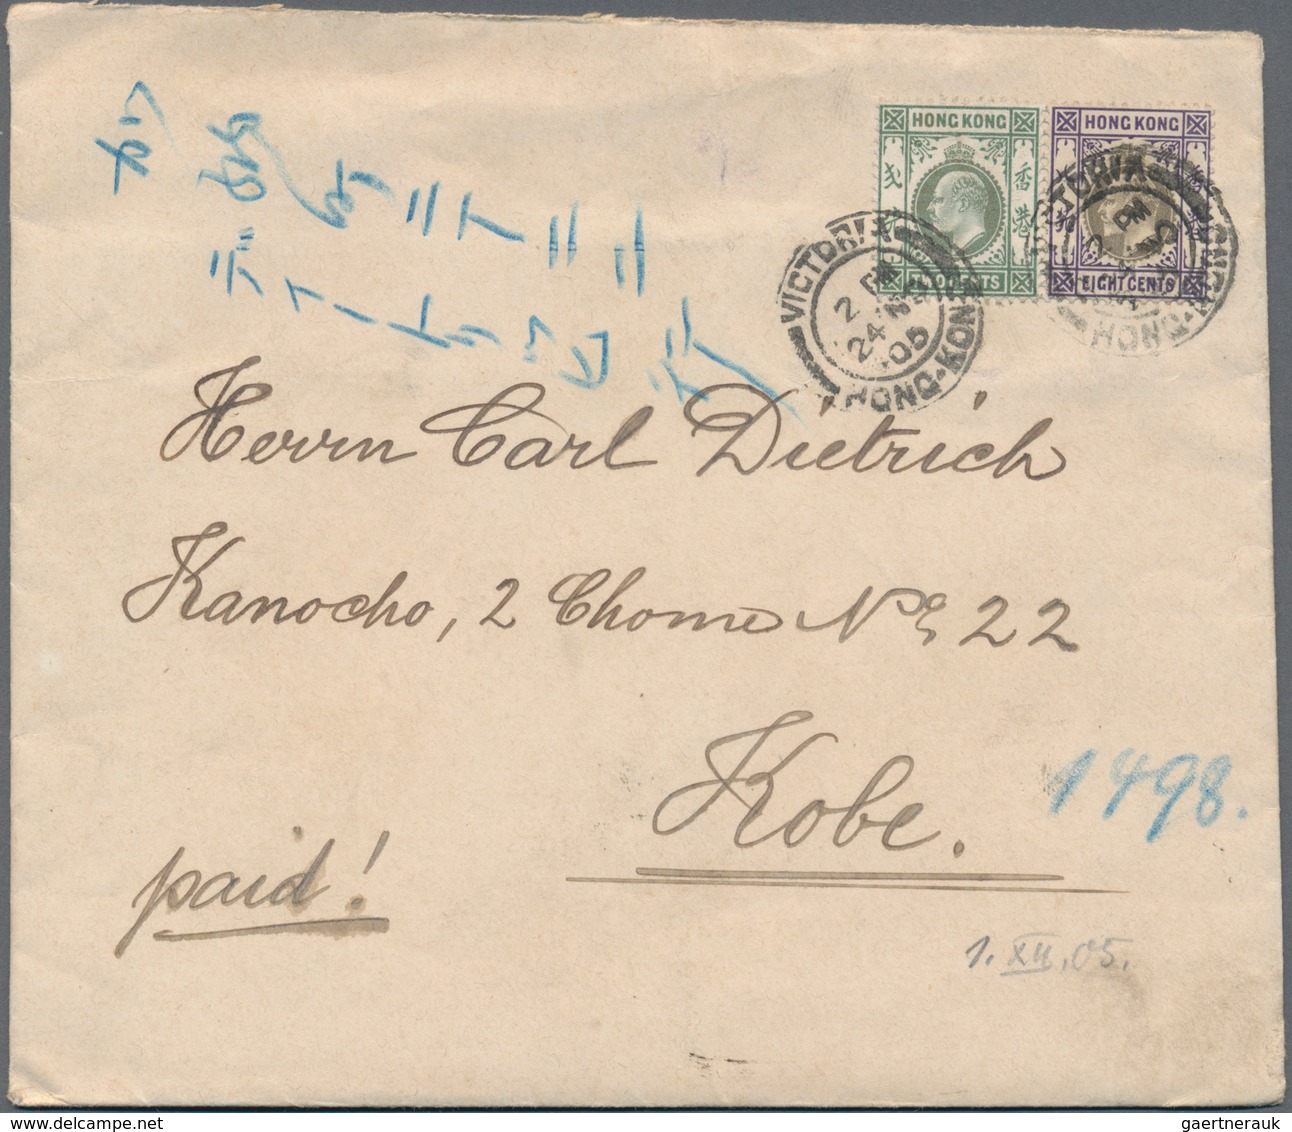 Hongkong: 1896/1989 (ca.), covers/used ppc or stationery (29) inc. 1905 cover at concession rate fro